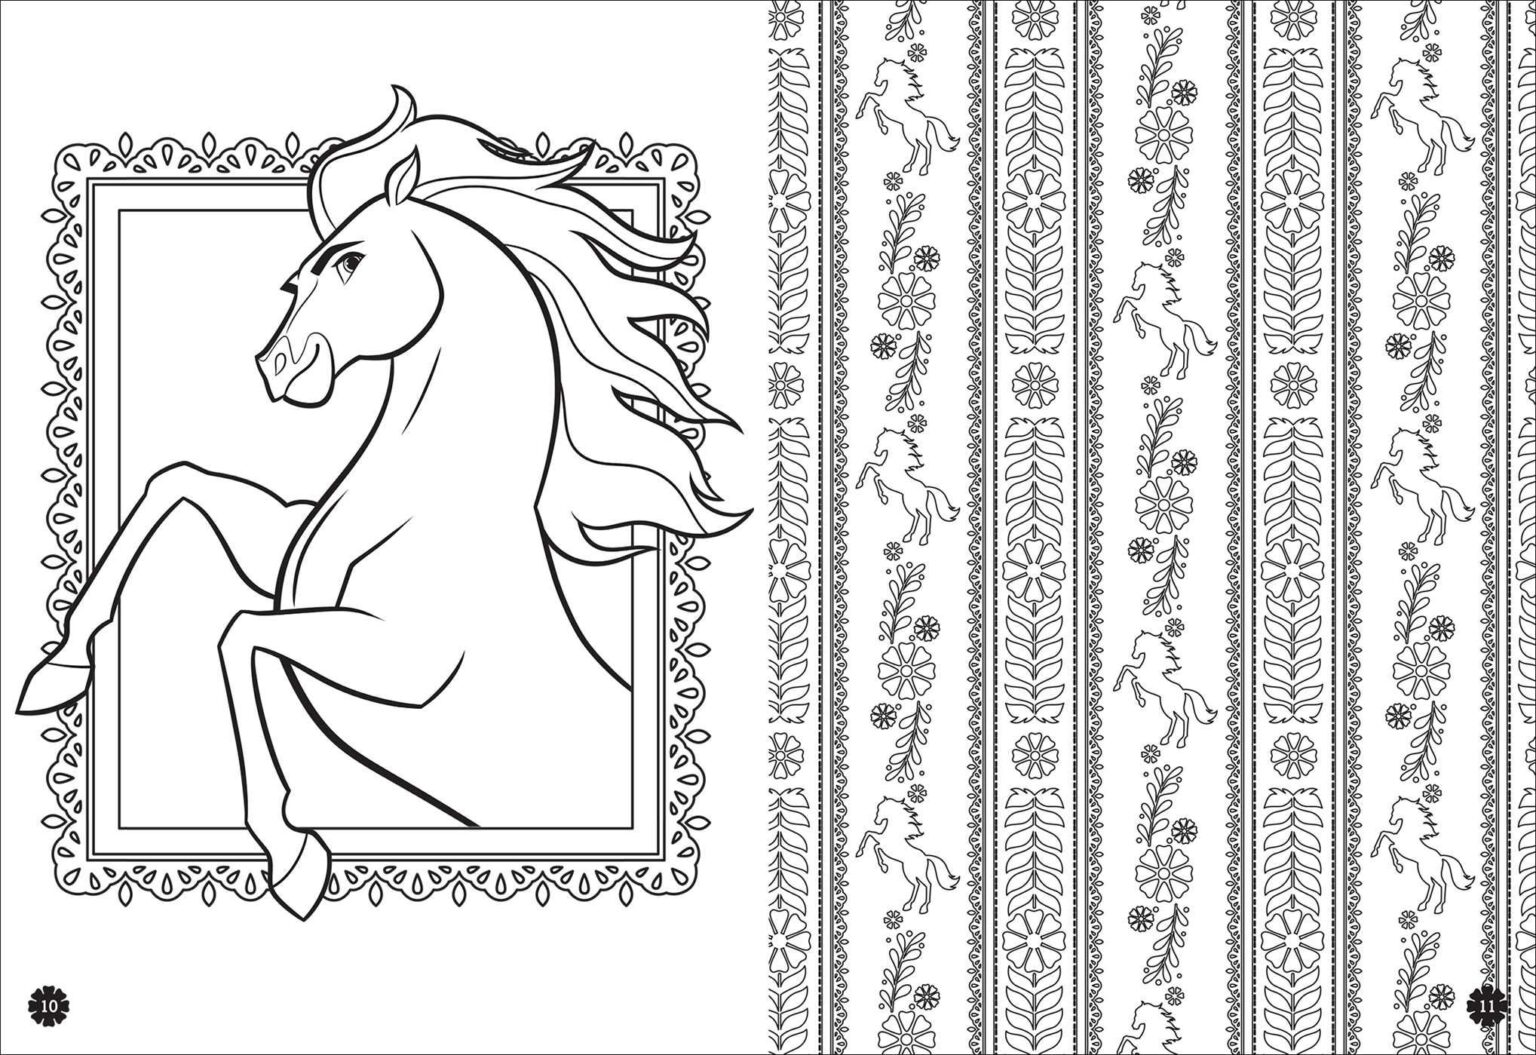 Download Spirit Untamed Coloring Pages From Book - Cartoon Images